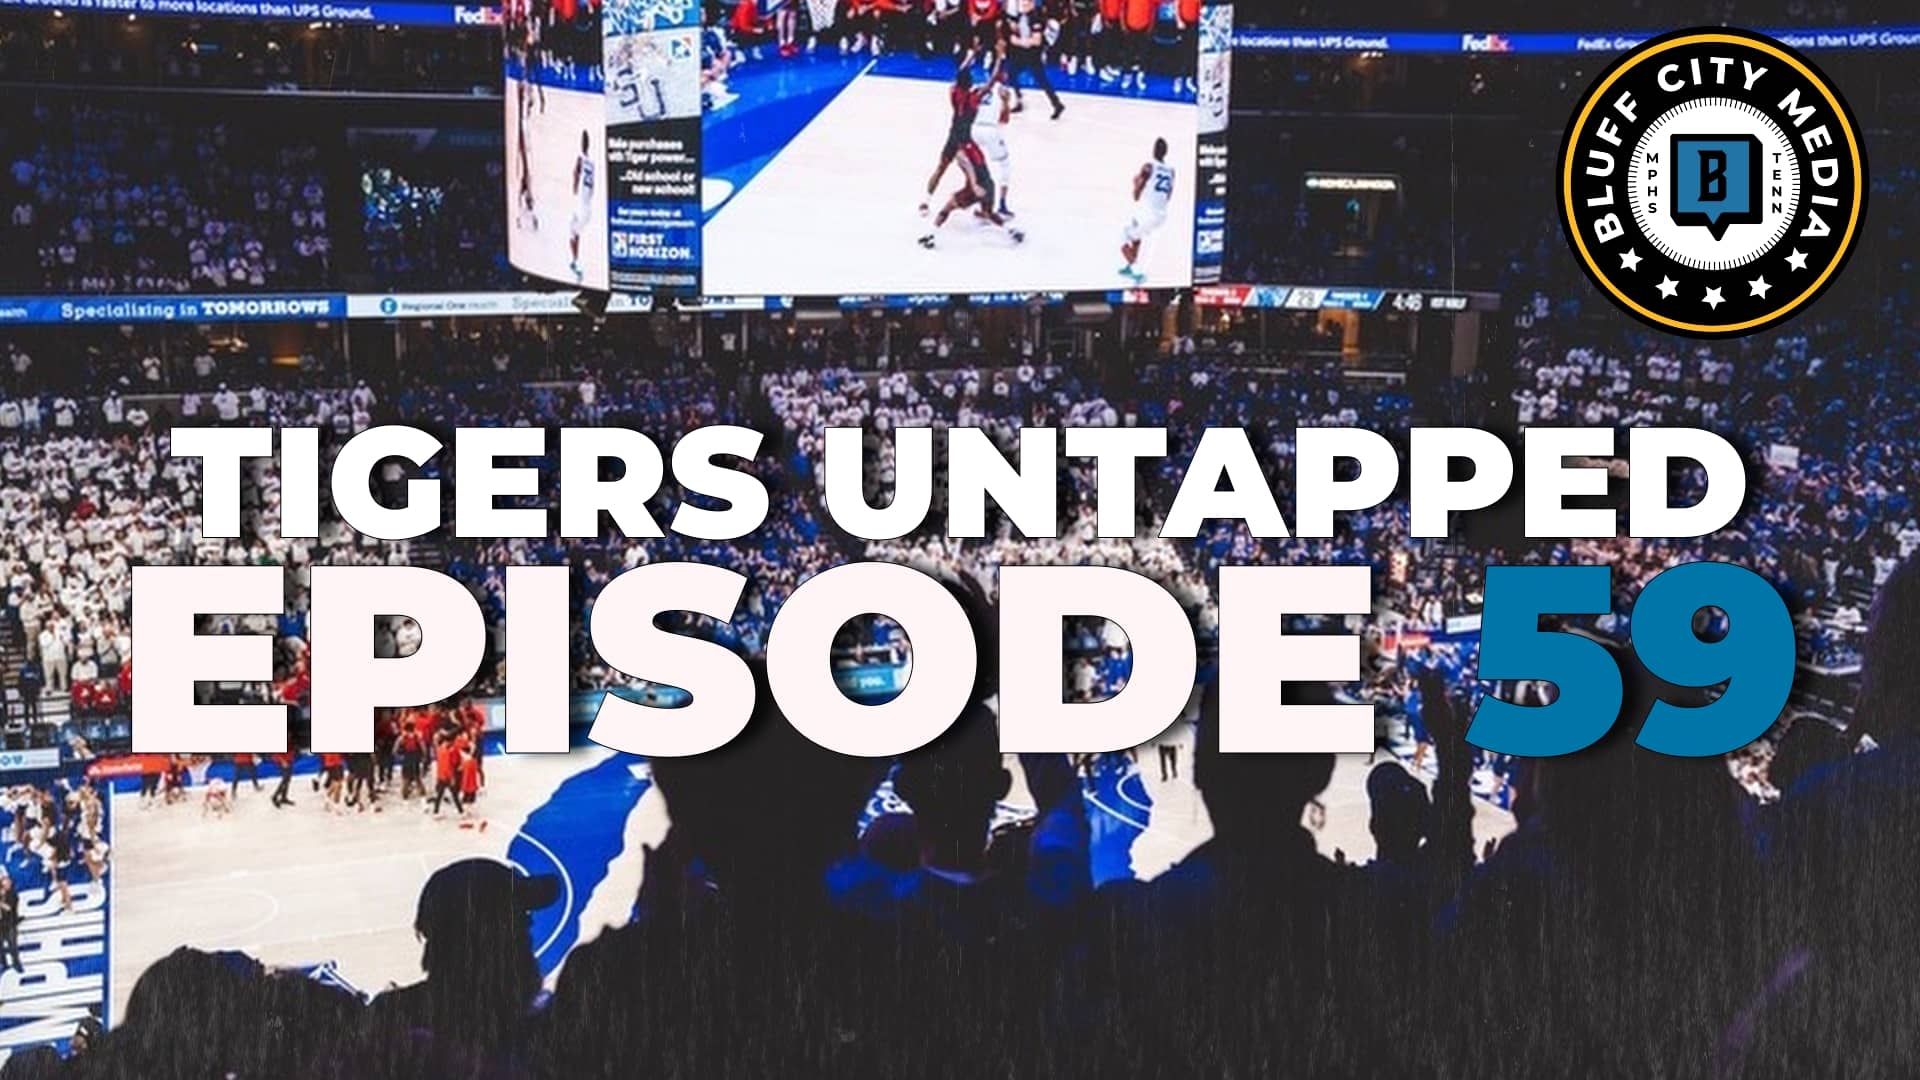 Featured image for “Tigers Untapped Ep 59: An Emotional Roller Coaster of a Week for Tiger Fans”